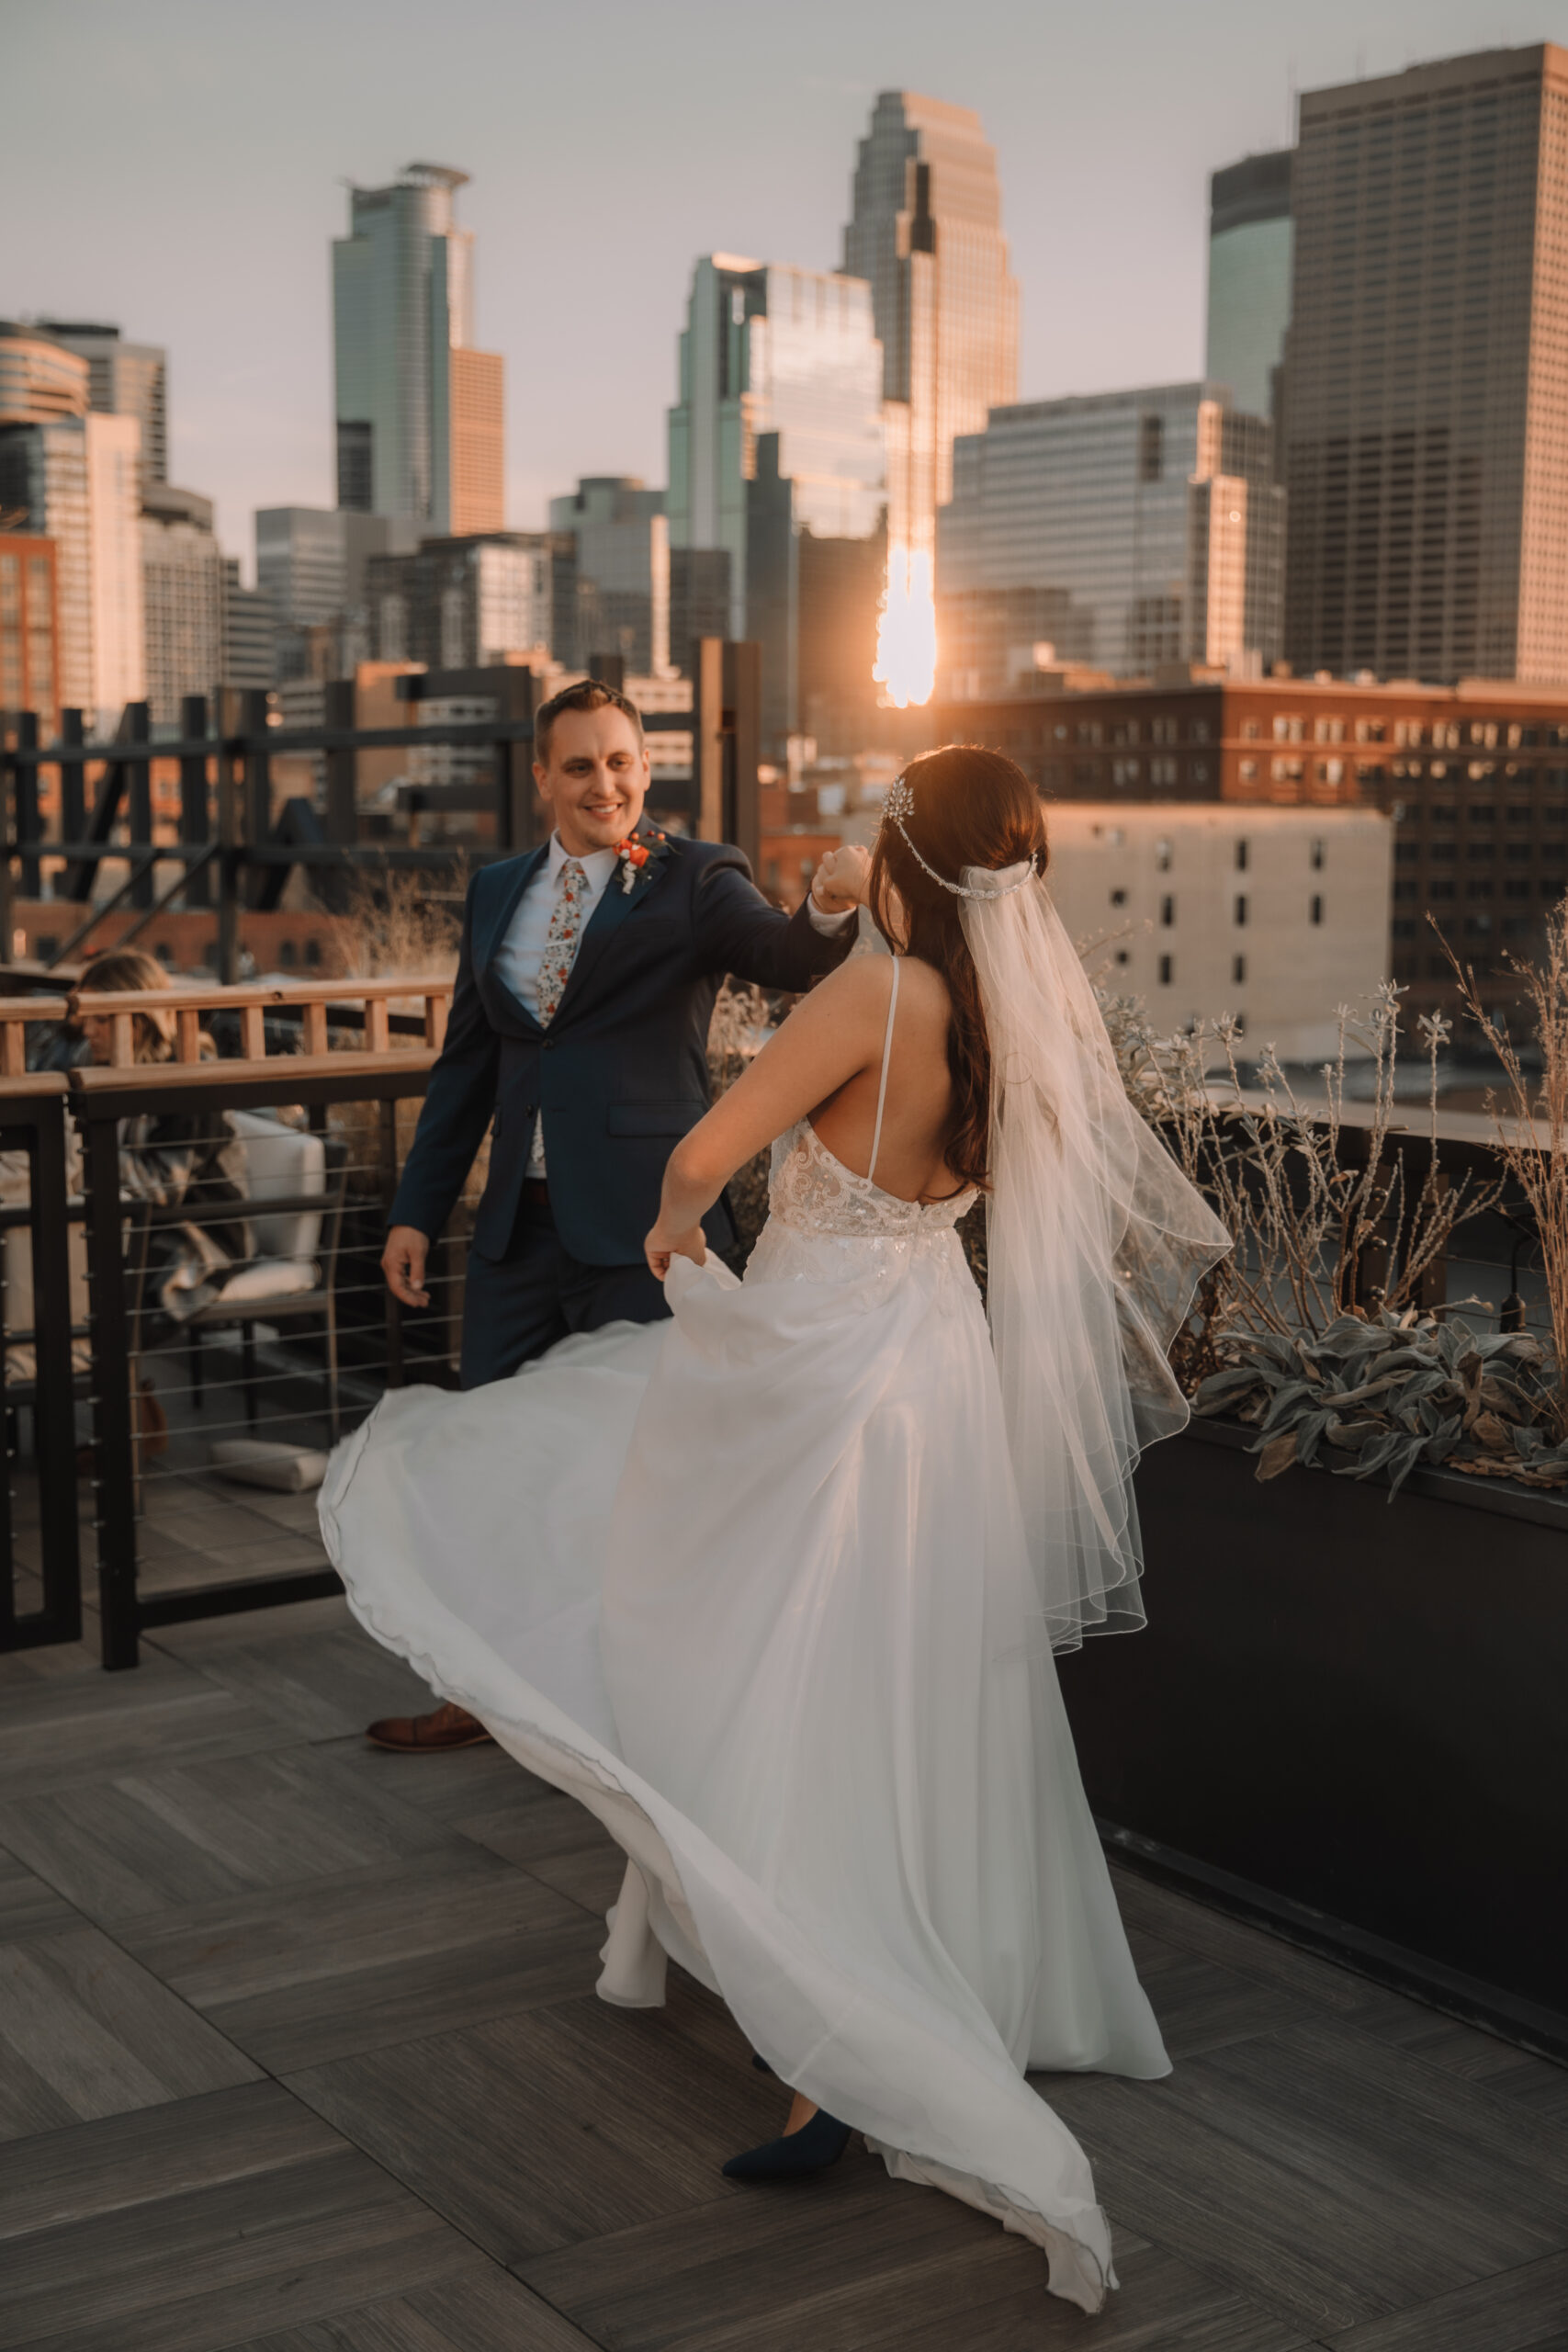 Bride and Groom dancing on top of a view deck overlooking the city of Minneapolis. The sun is reflecting off of the skyscrapers.